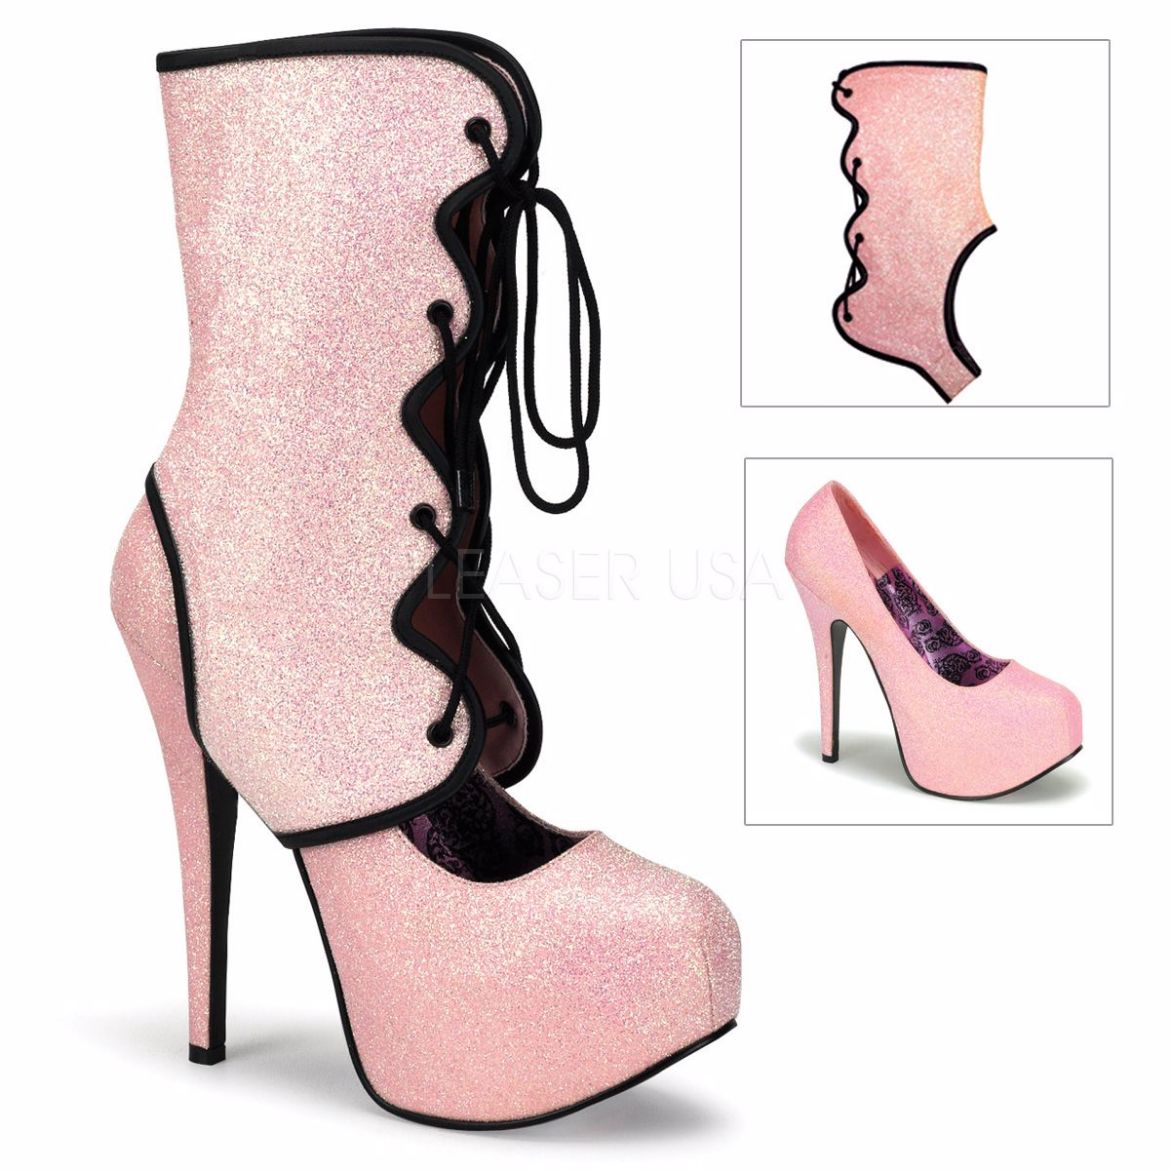 Product image of Bordello Teeze-31G Baby Pink Mini Glitter, 5 3/4 inch (14.6 cm) Heel, 1 3/4 inch (4.4 cm) Platform Ankle Boot